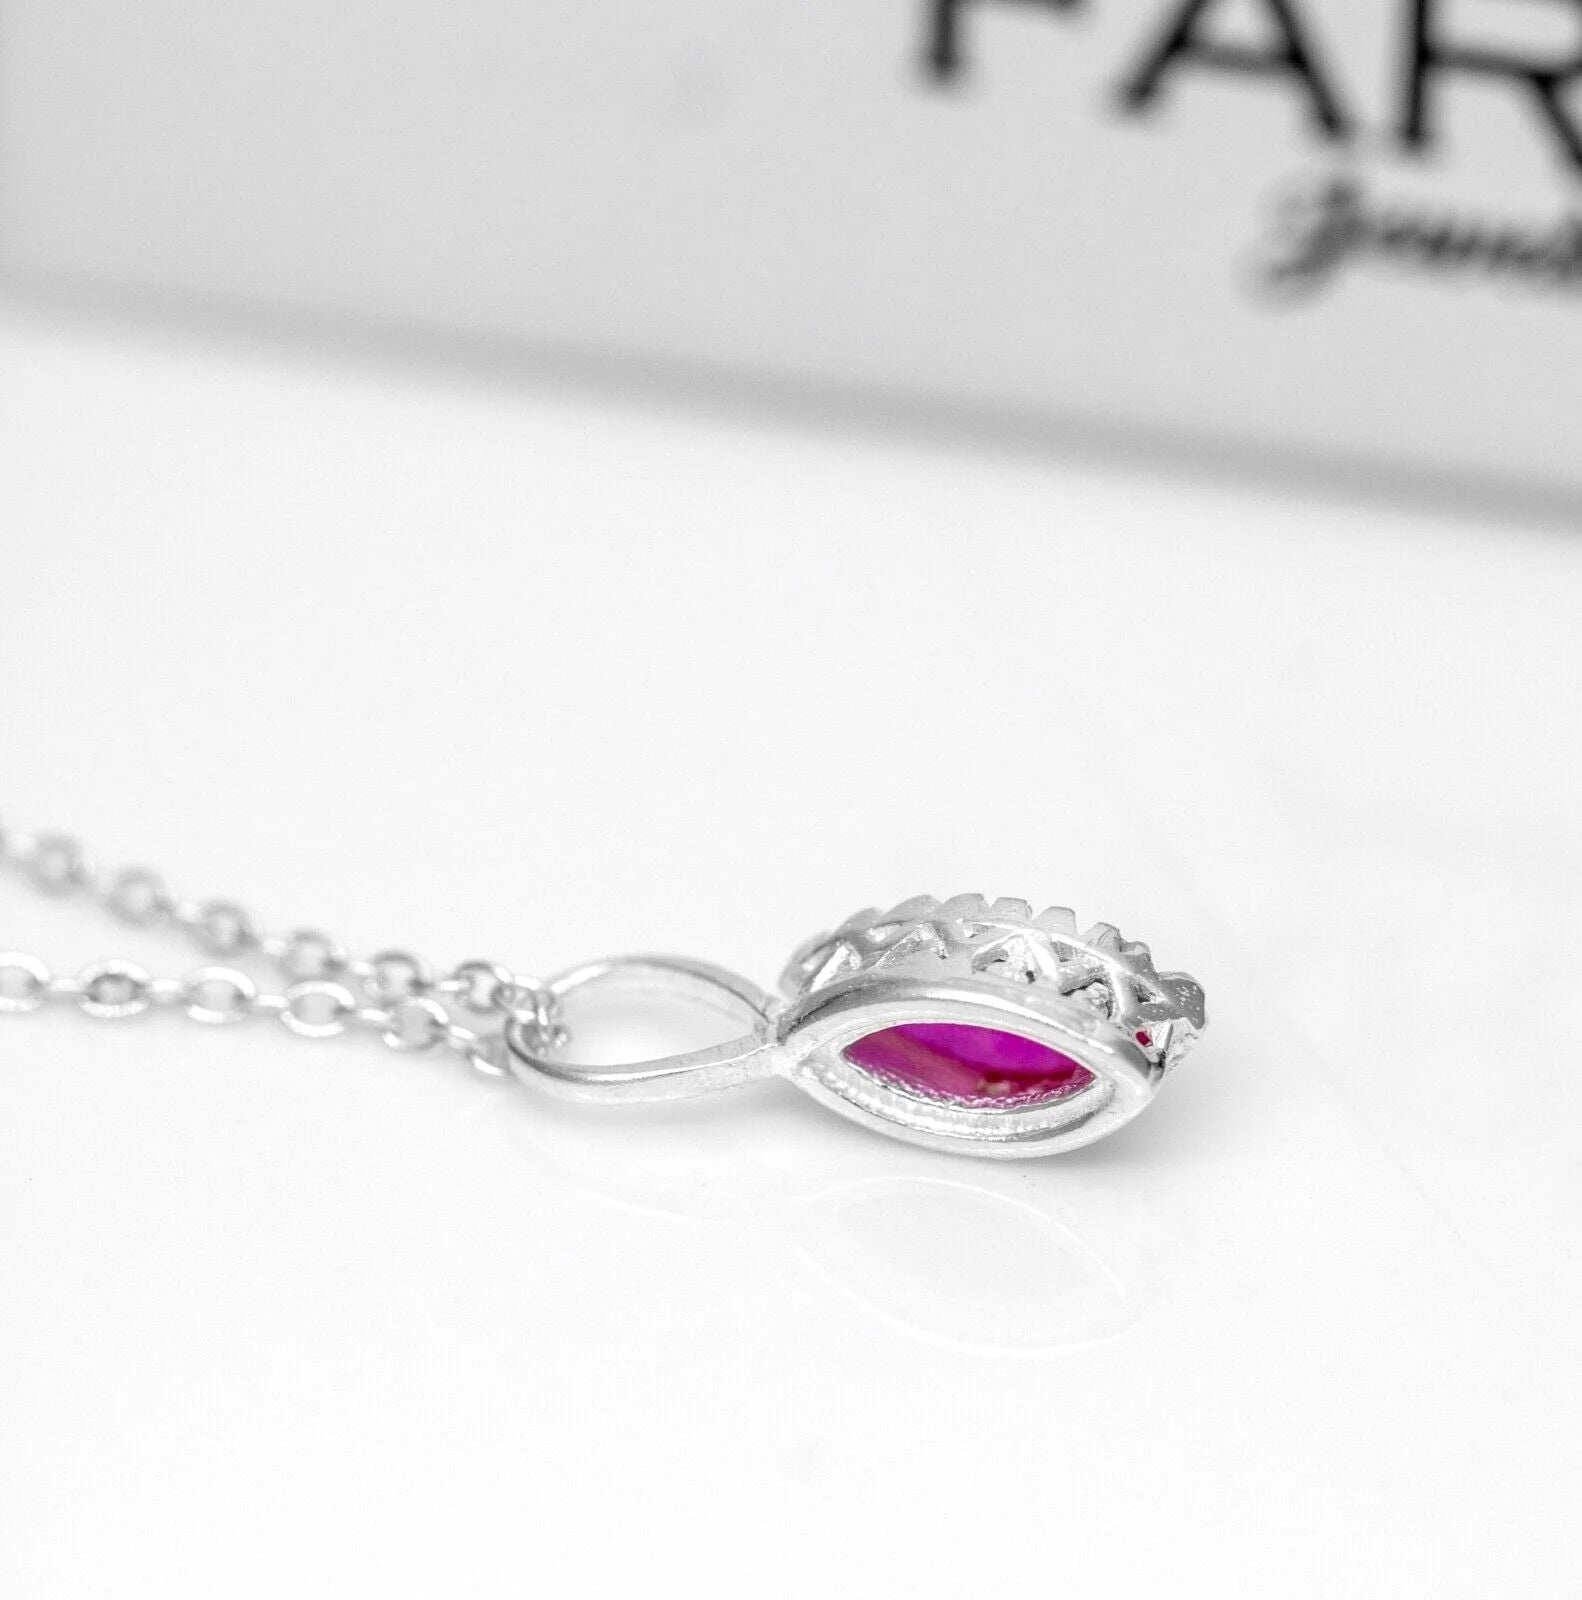 Marquise Red Ruby Sterling Silver 925 Pendant Necklace Ladies Jewellery Gift